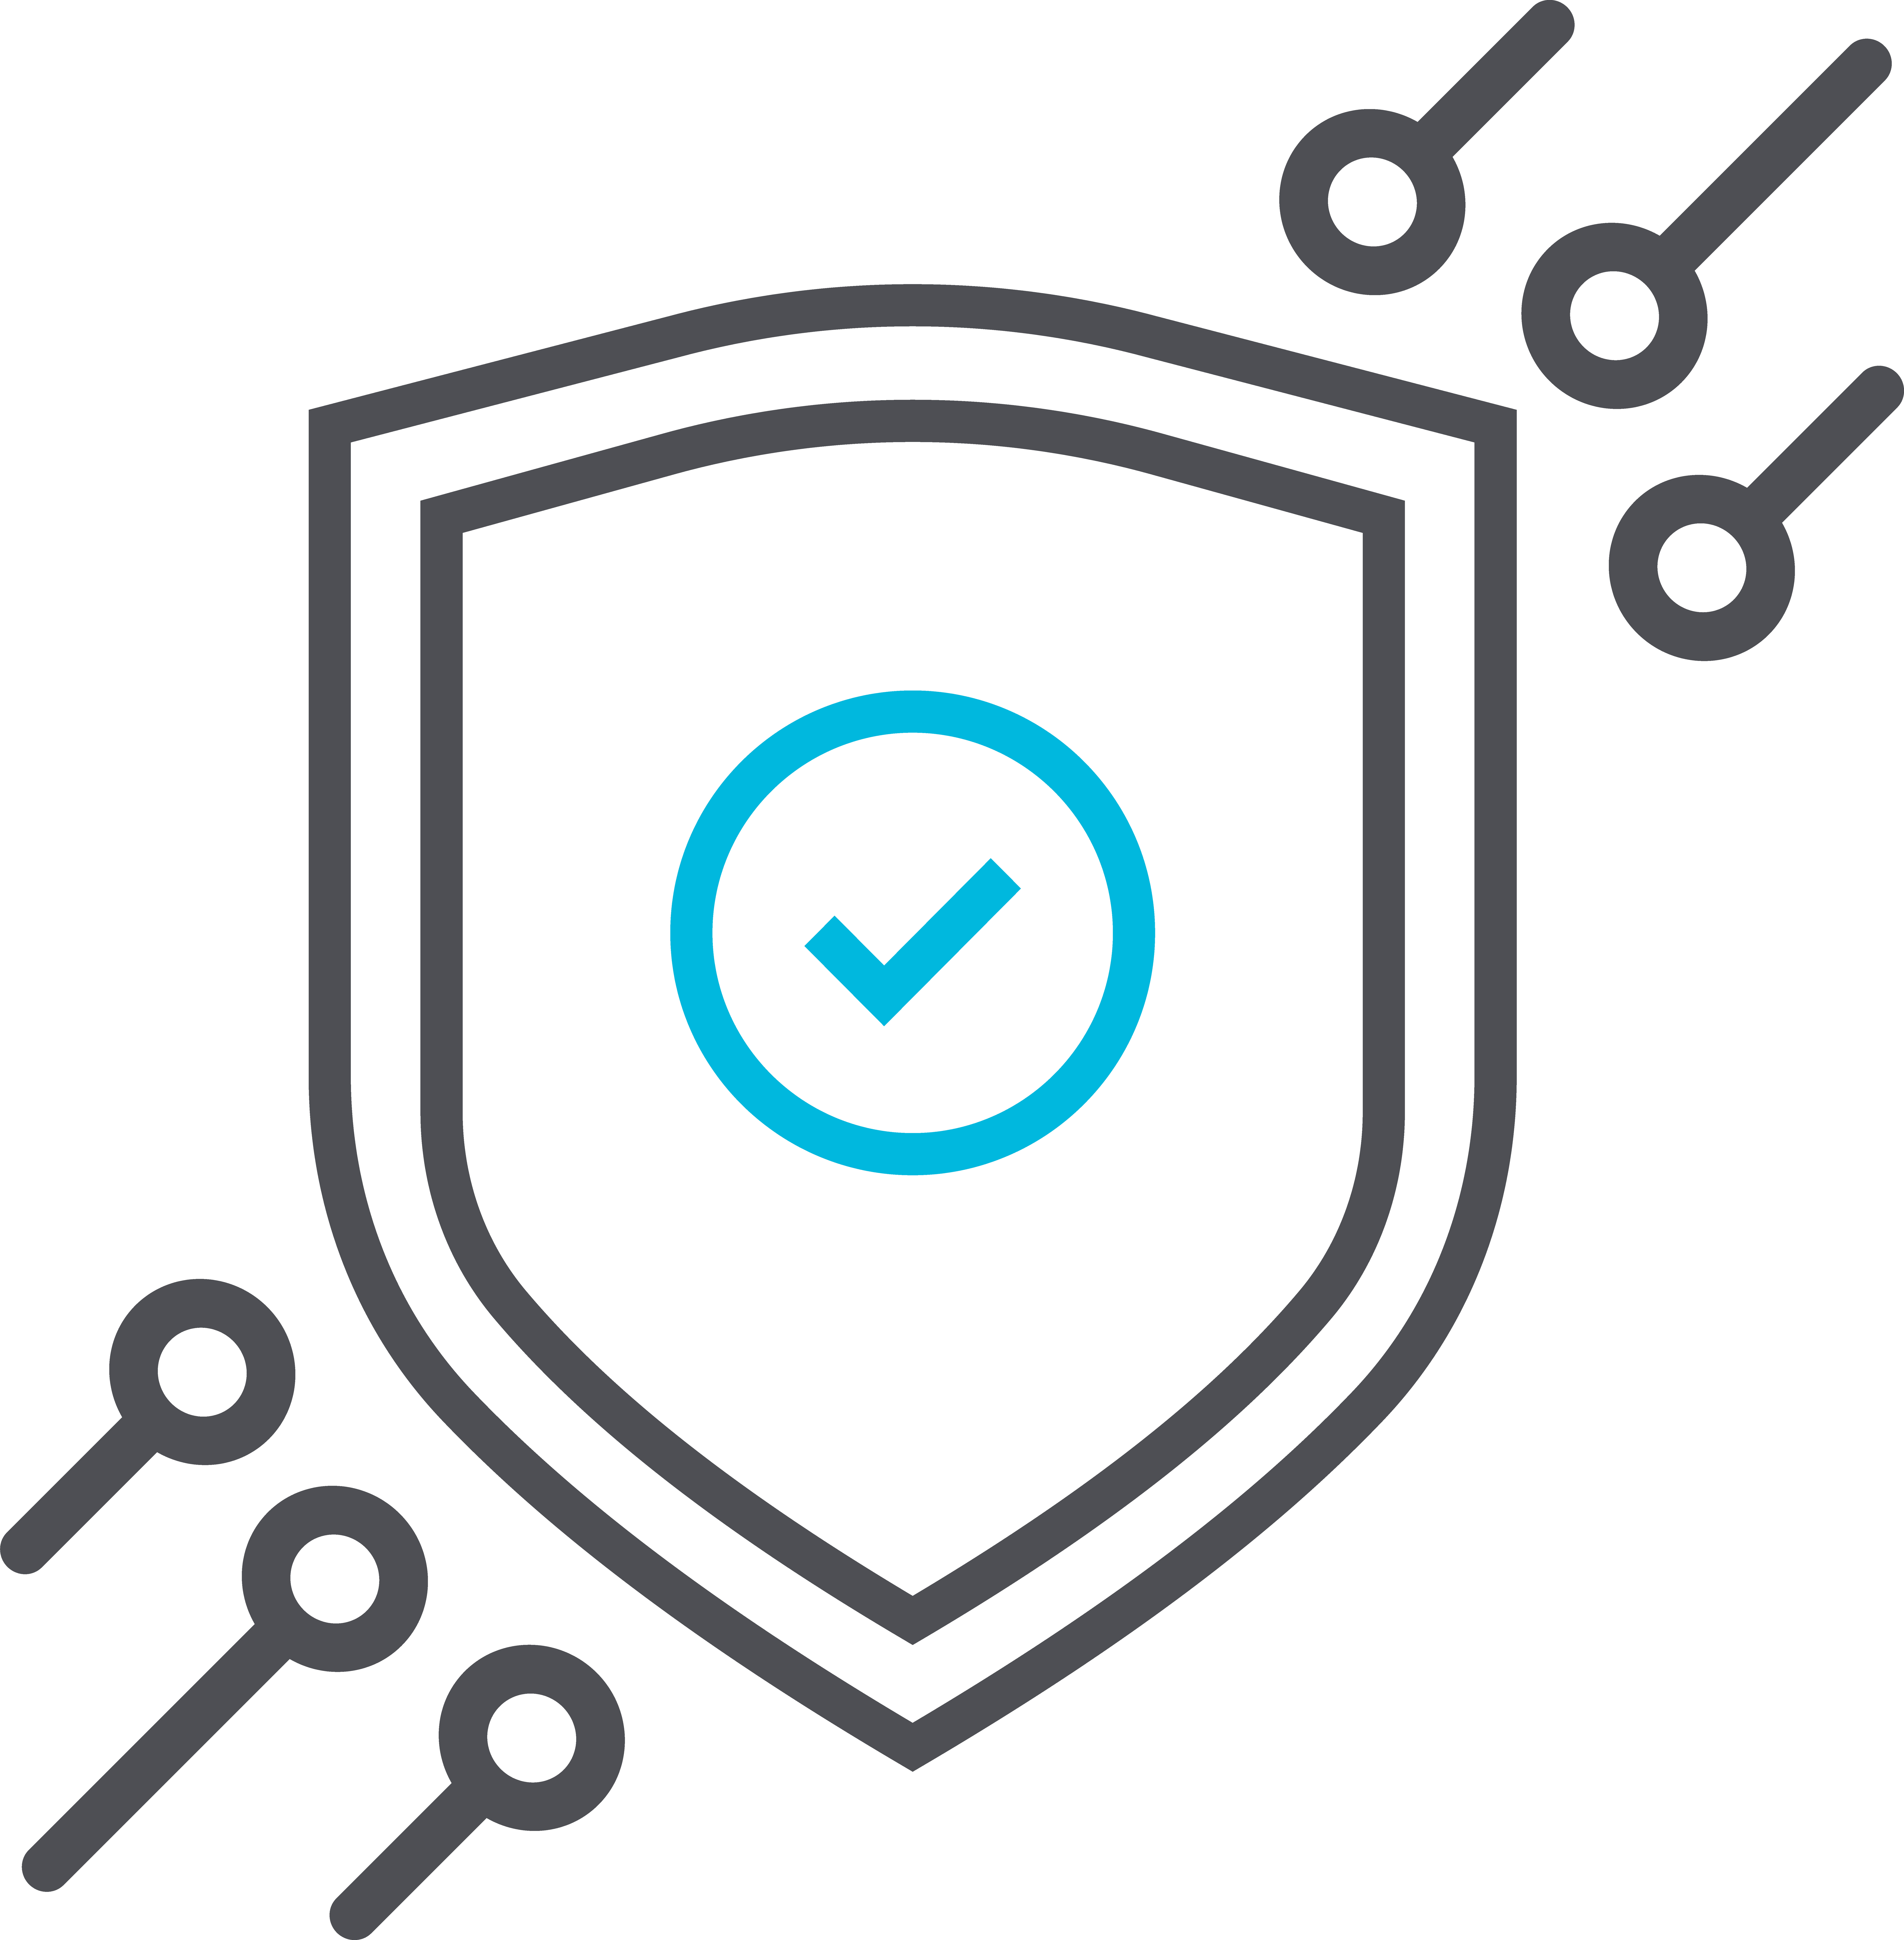 Cyber security shield with check mark